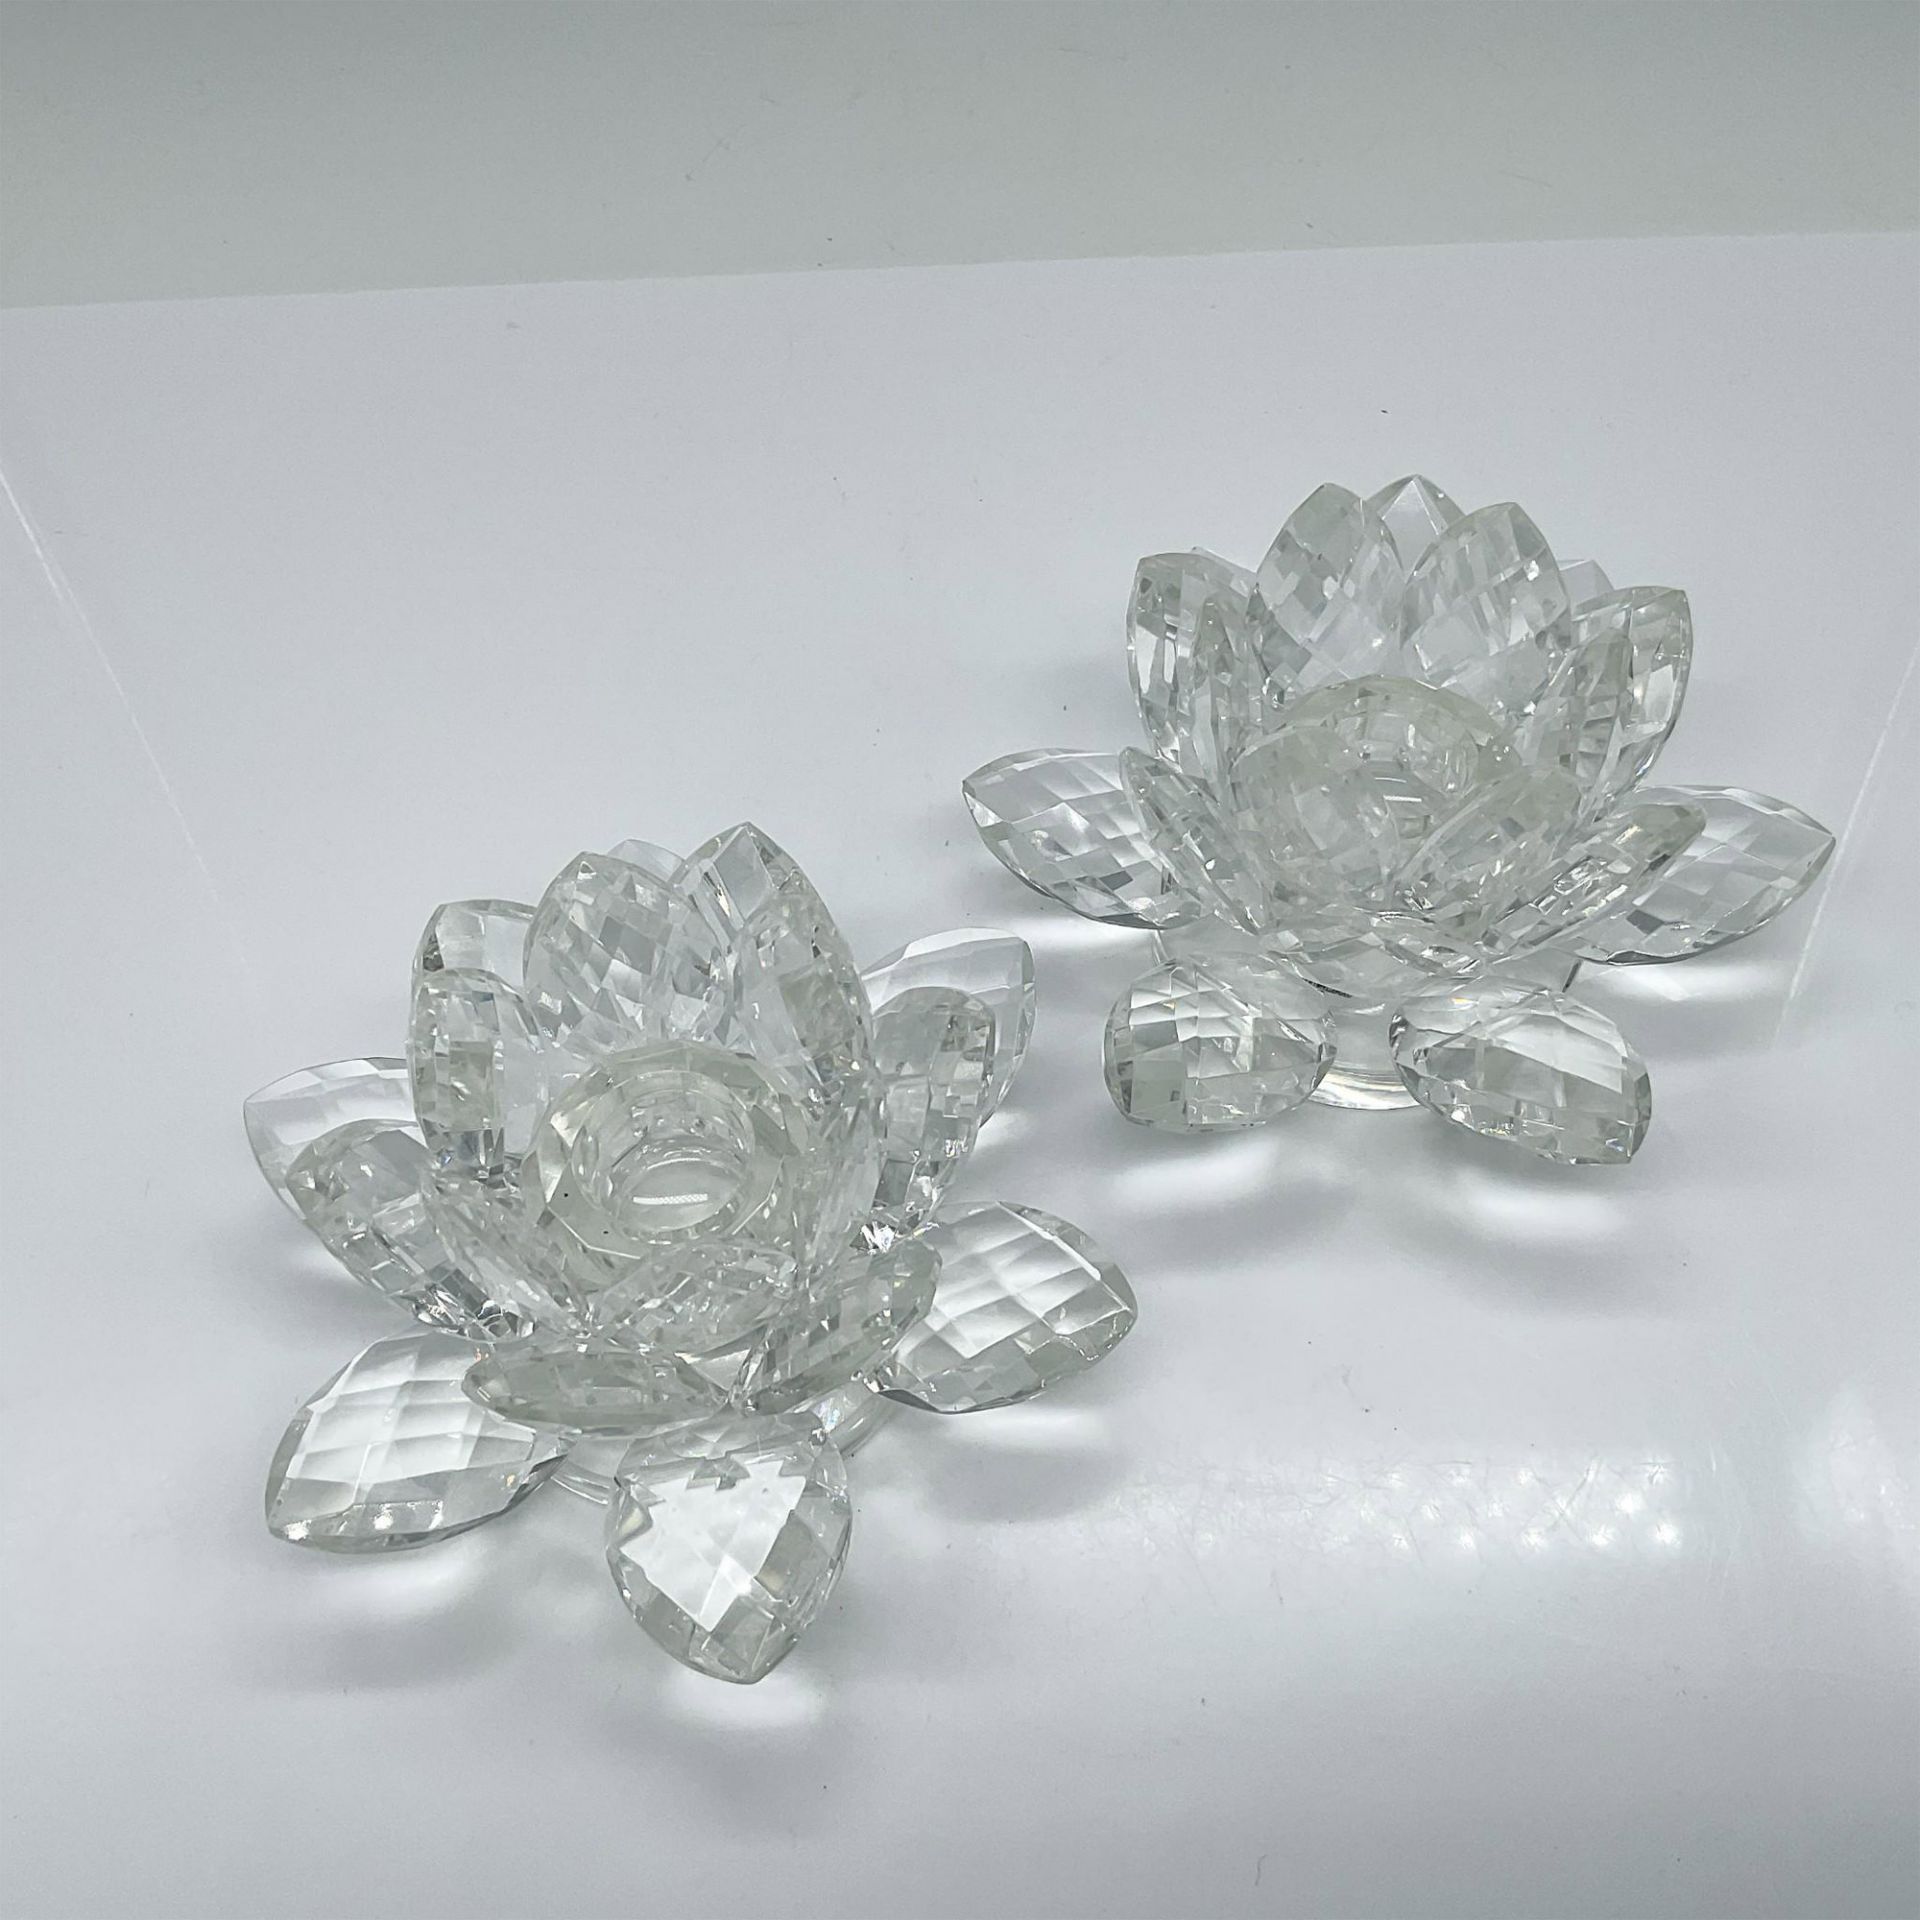 2pc Crystal Lotus Flower Candle Holders - Image 2 of 3